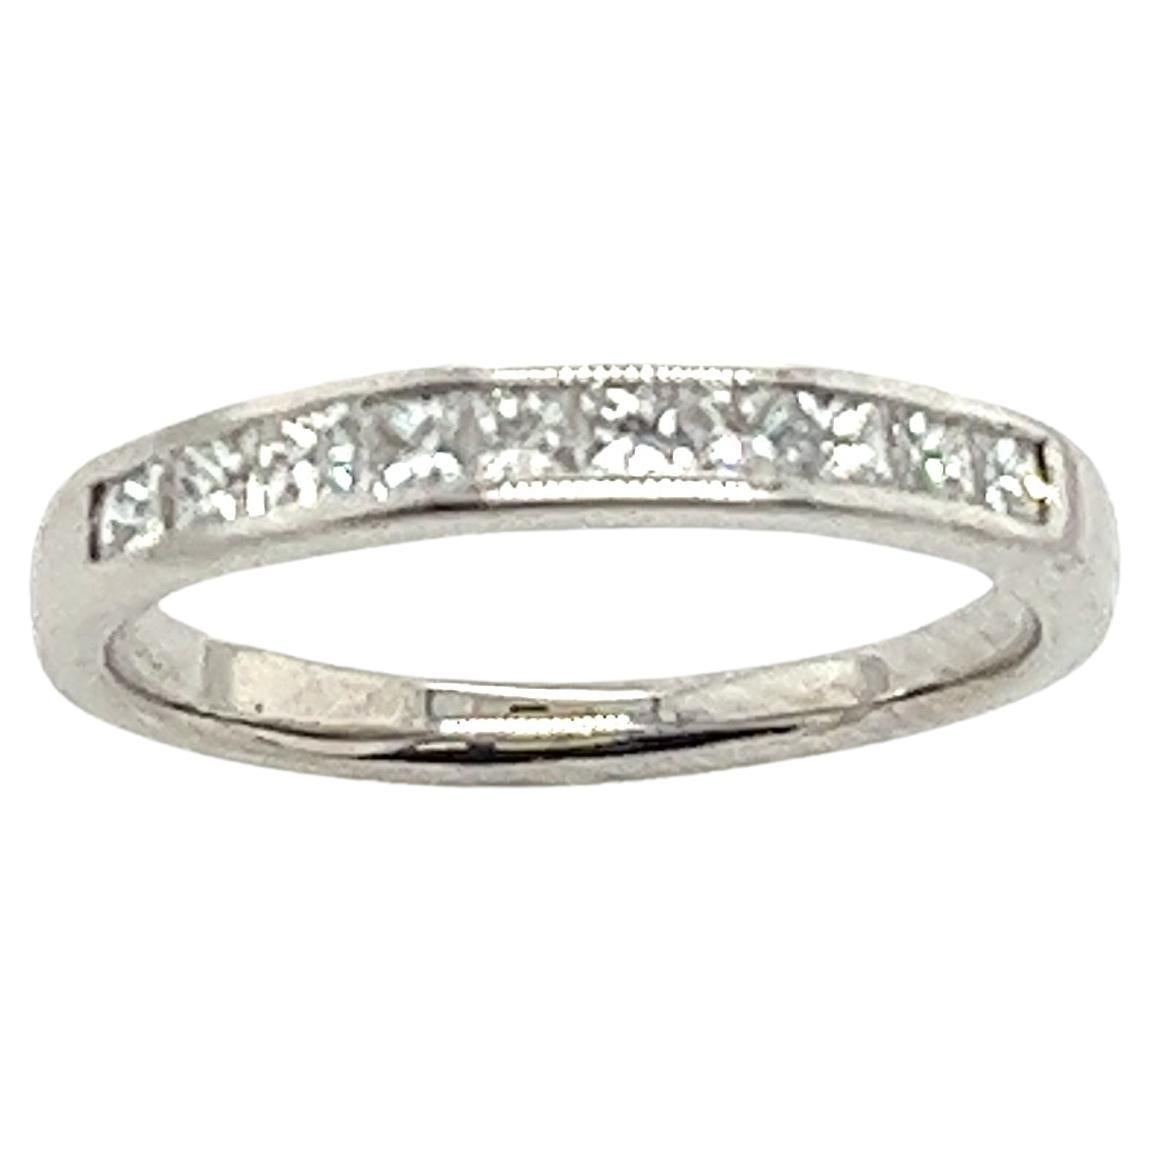 18ct White Gold Princess Cut Diamond Half Eternity Ring Set With 0.40ct H/SI1 For Sale